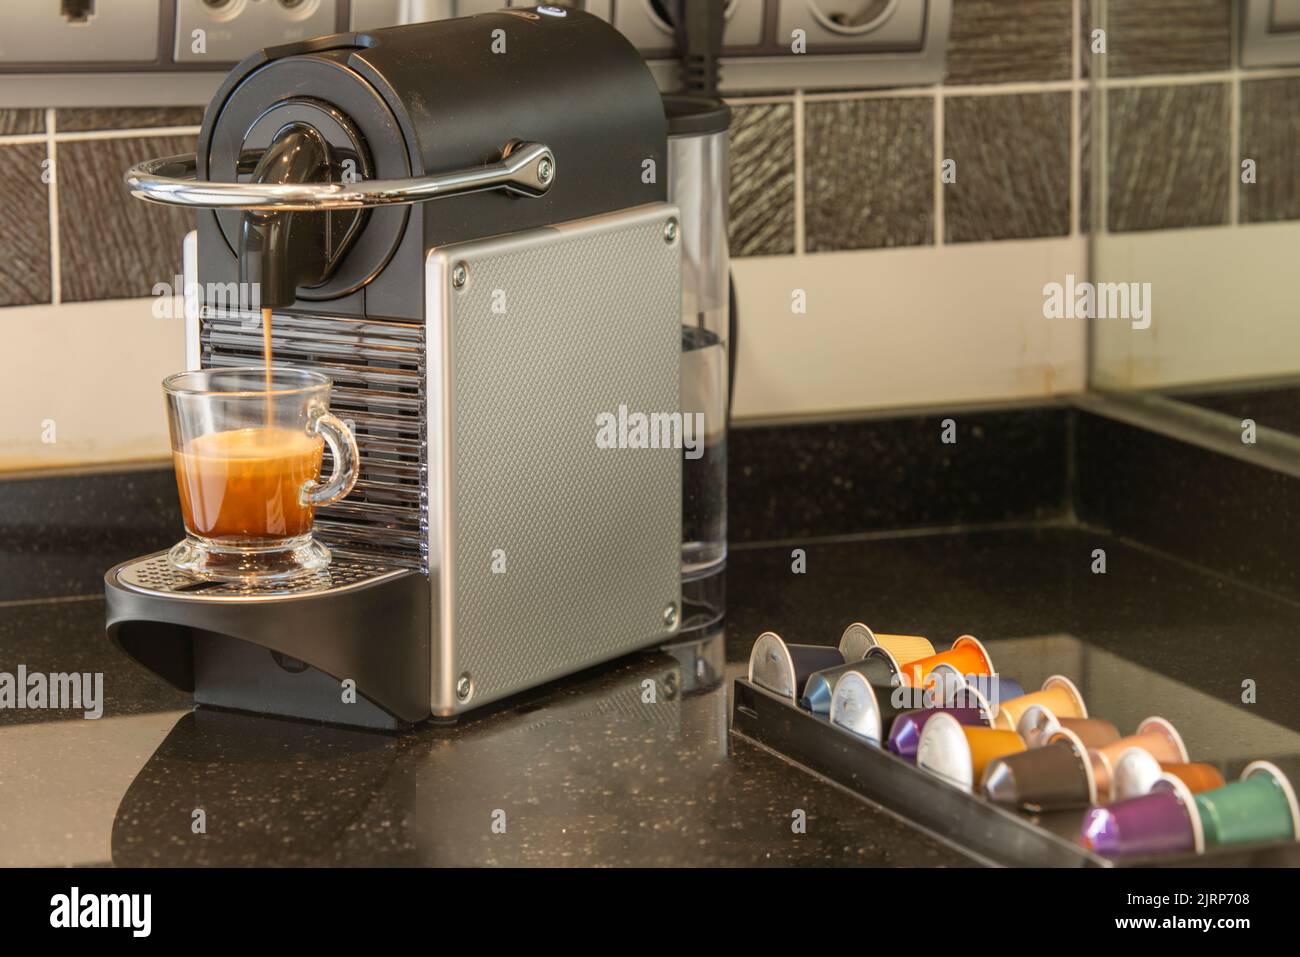 Automatic coffee machine coffee capsules or pods pouring espresso drink. Making coffee in a coffee machine. Brewing coffee Stock Photo Alamy